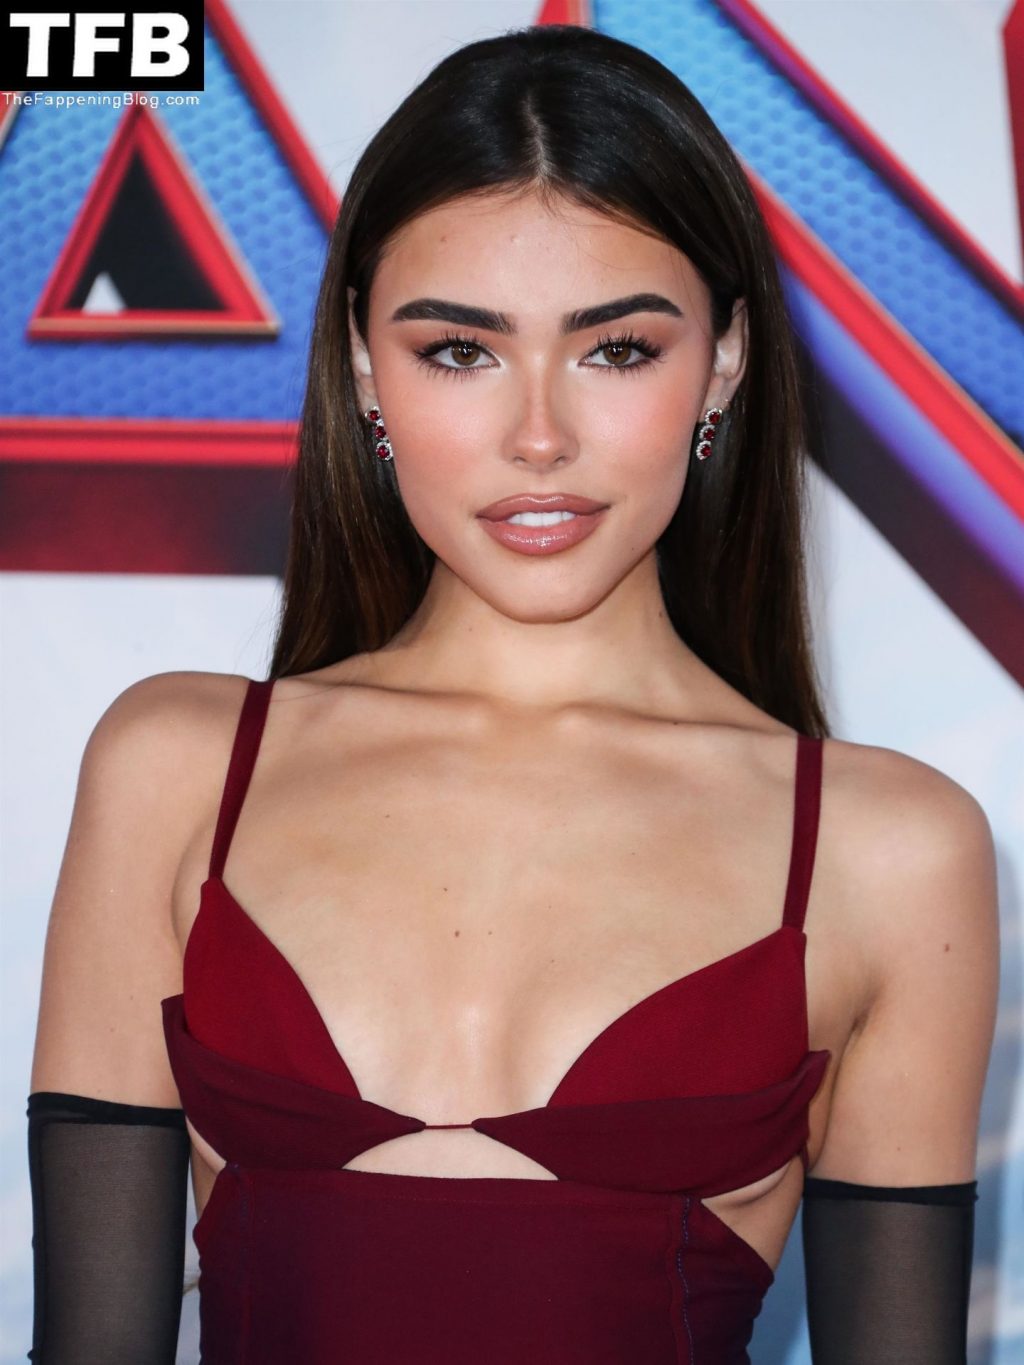 Madison Beer Wows in a Red Dress at the Premiere of “Spider-Man: No Way Home” in LA (93 New Photos + Video)